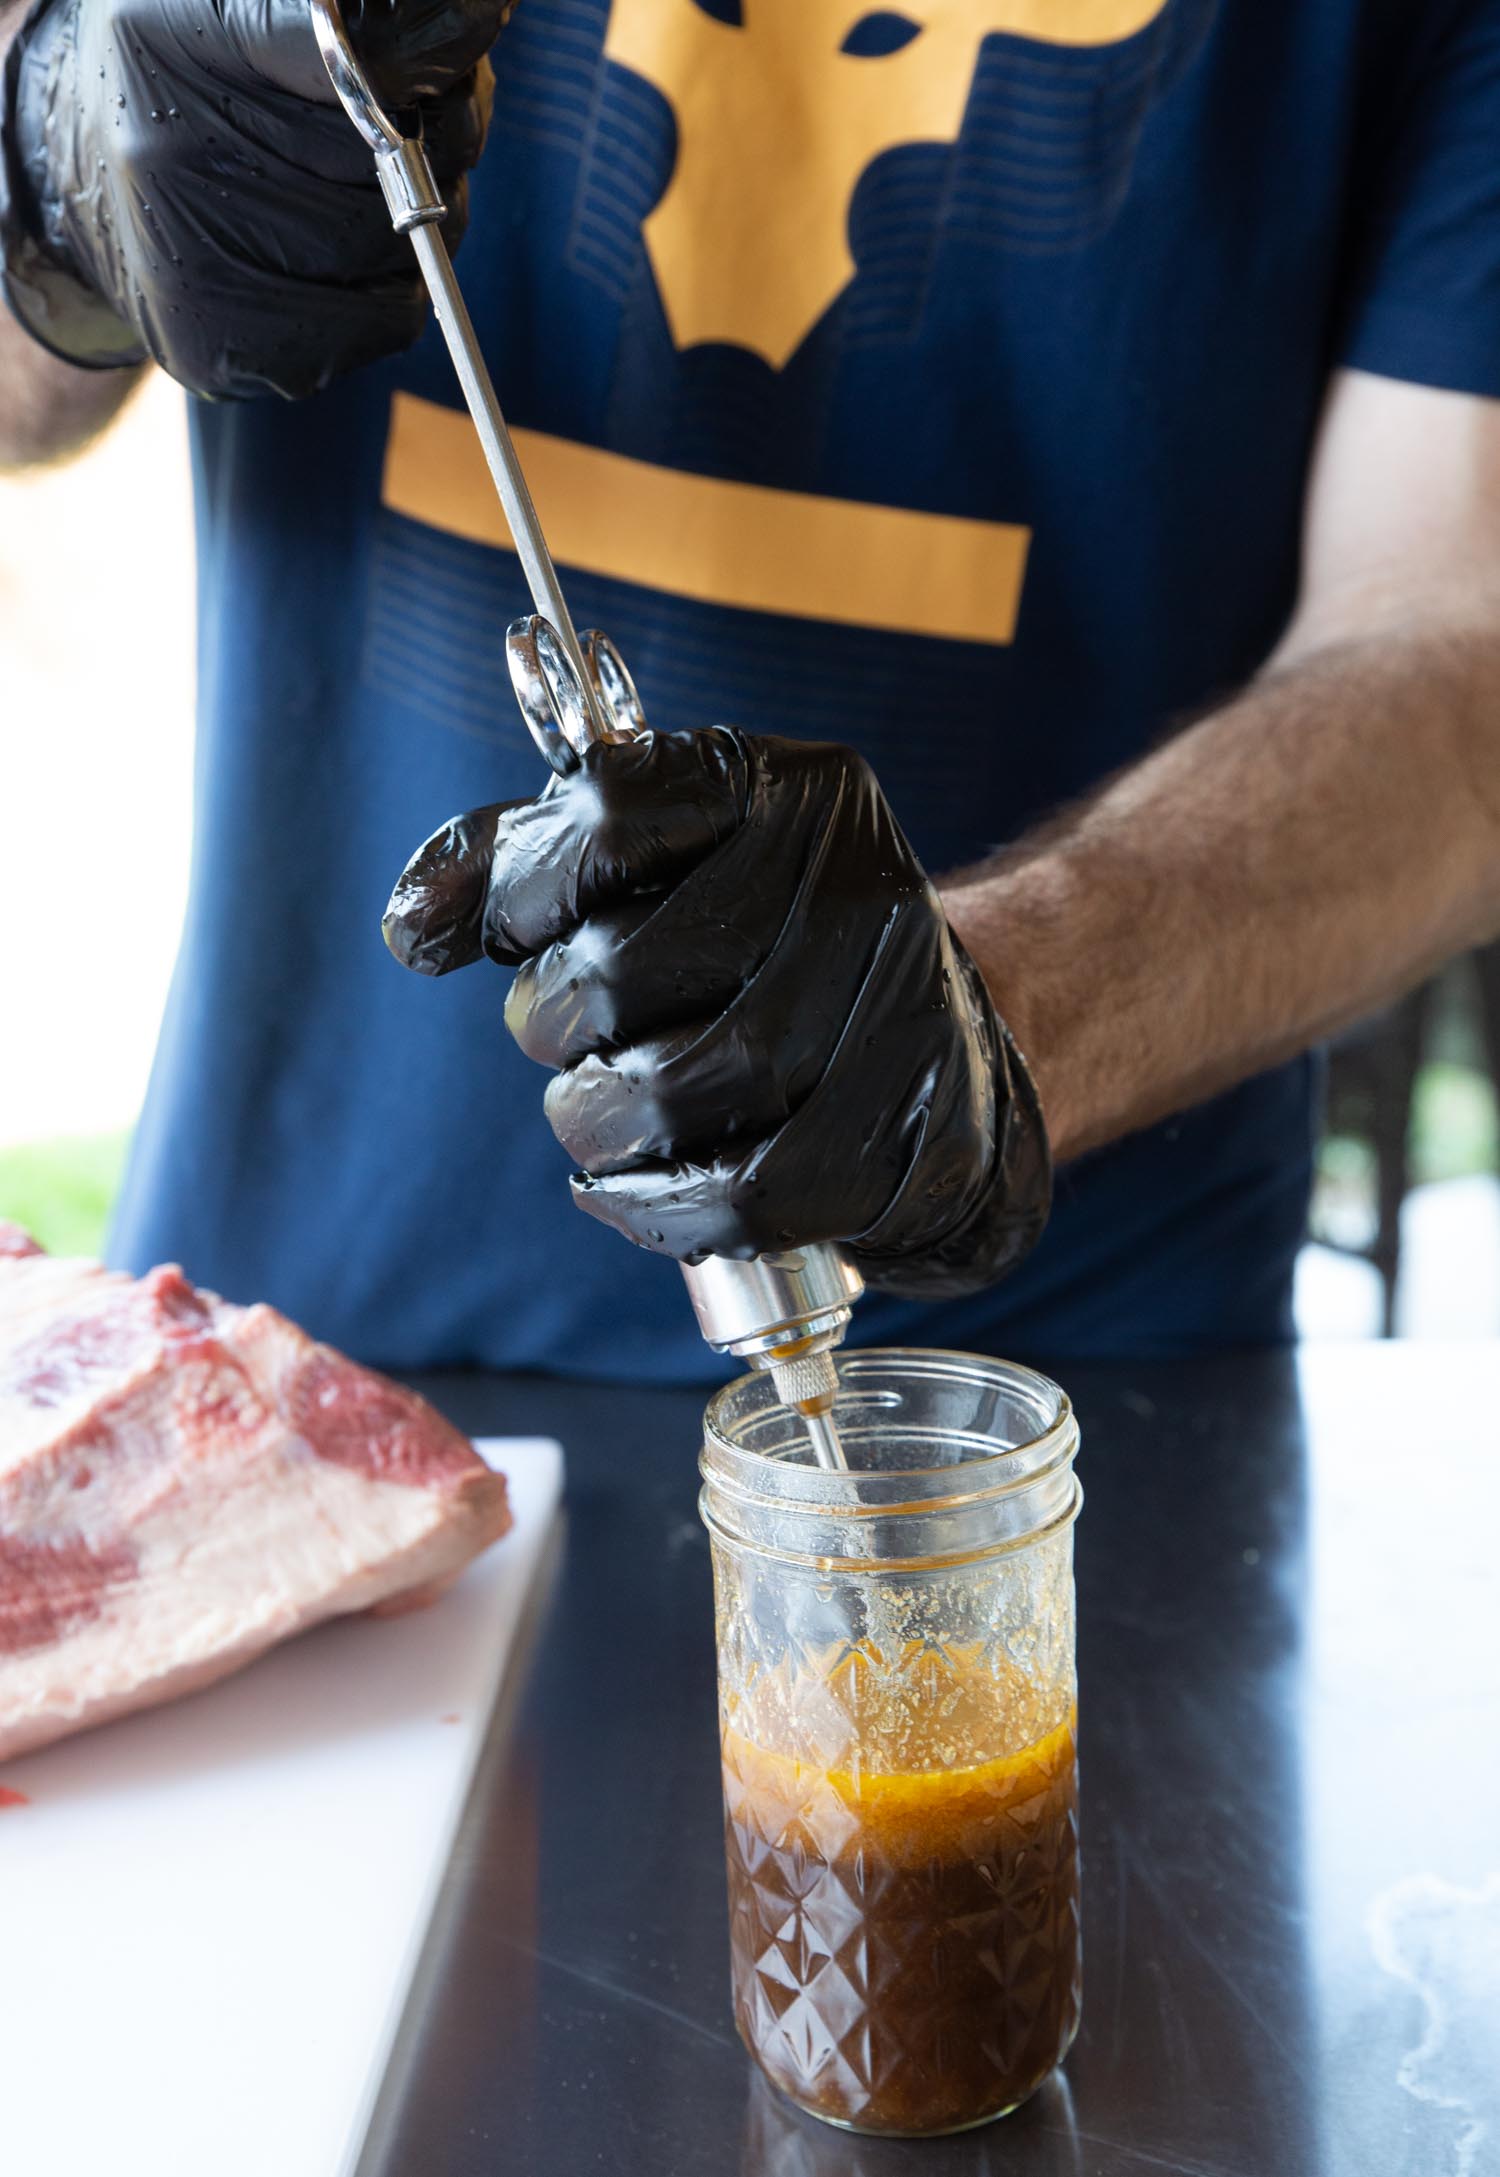 A man pulling the meat injection liquid into a syringe.